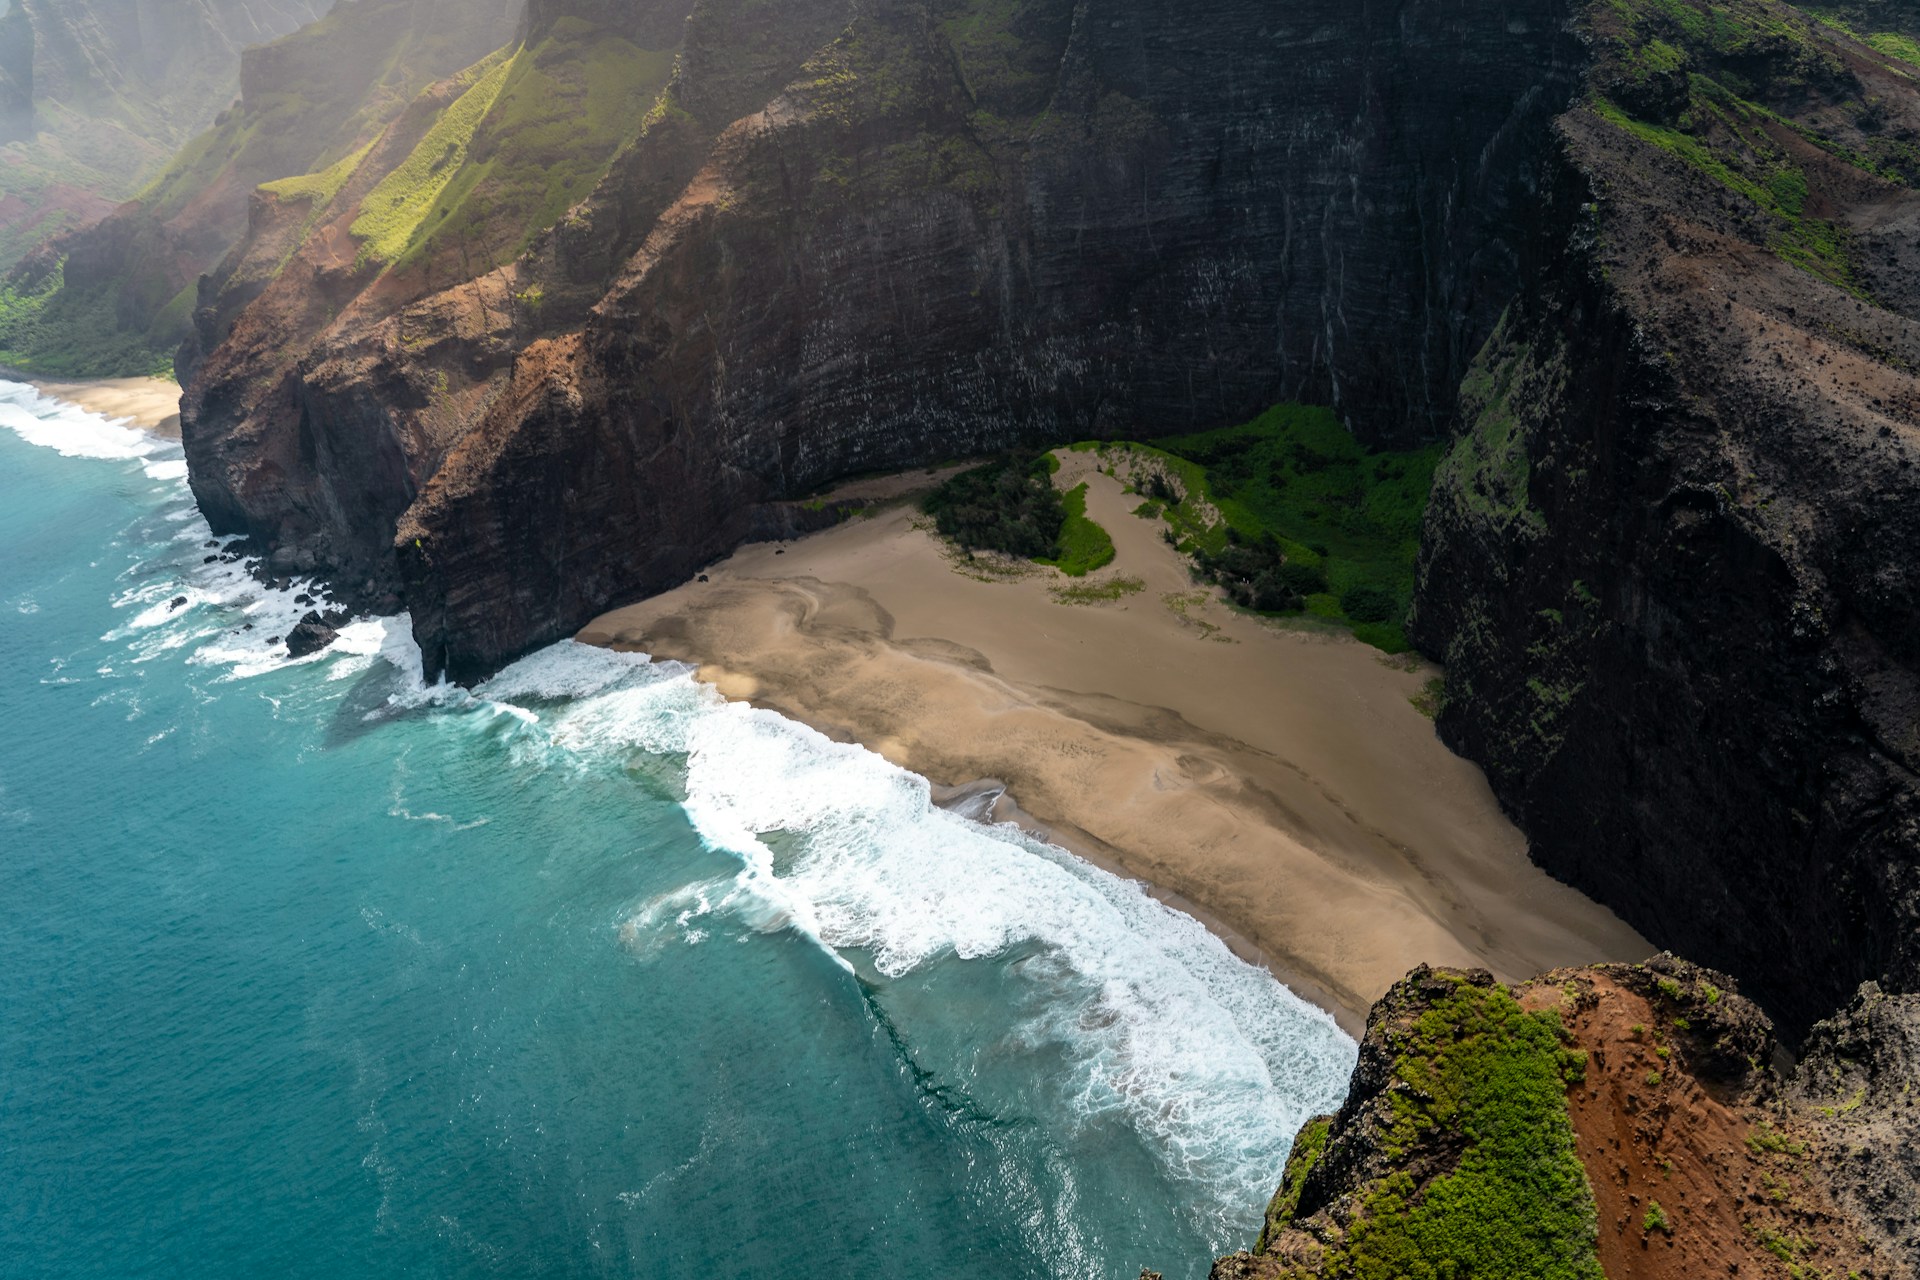 photo - a beautiful birds eye view photo taken from a helicopter of Hawaiian island with a secluded beach and ricky green mountain cliff